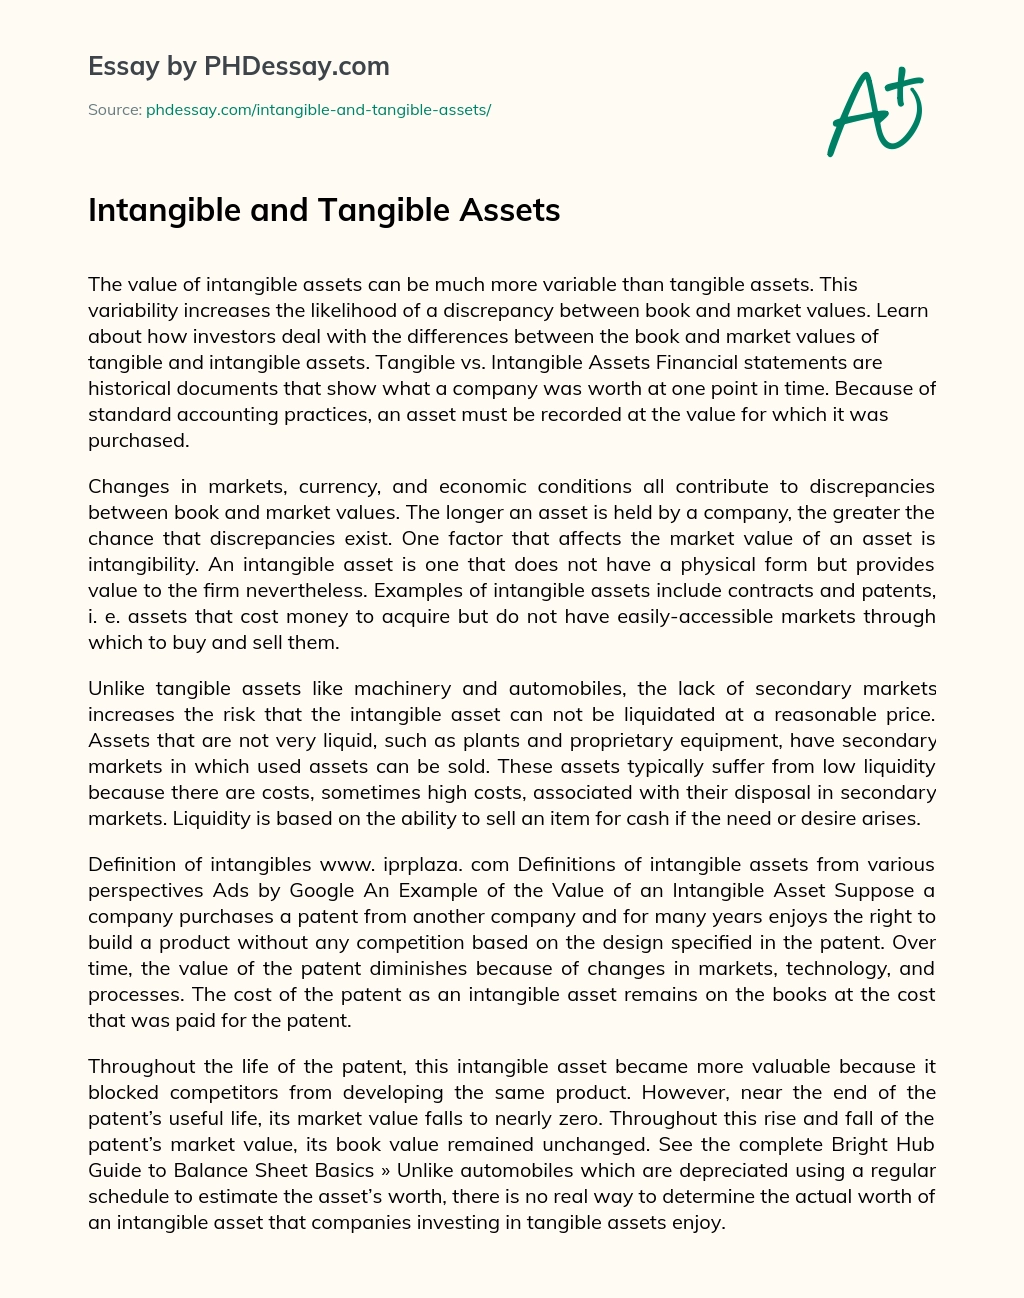 Intangible and Tangible Assets essay